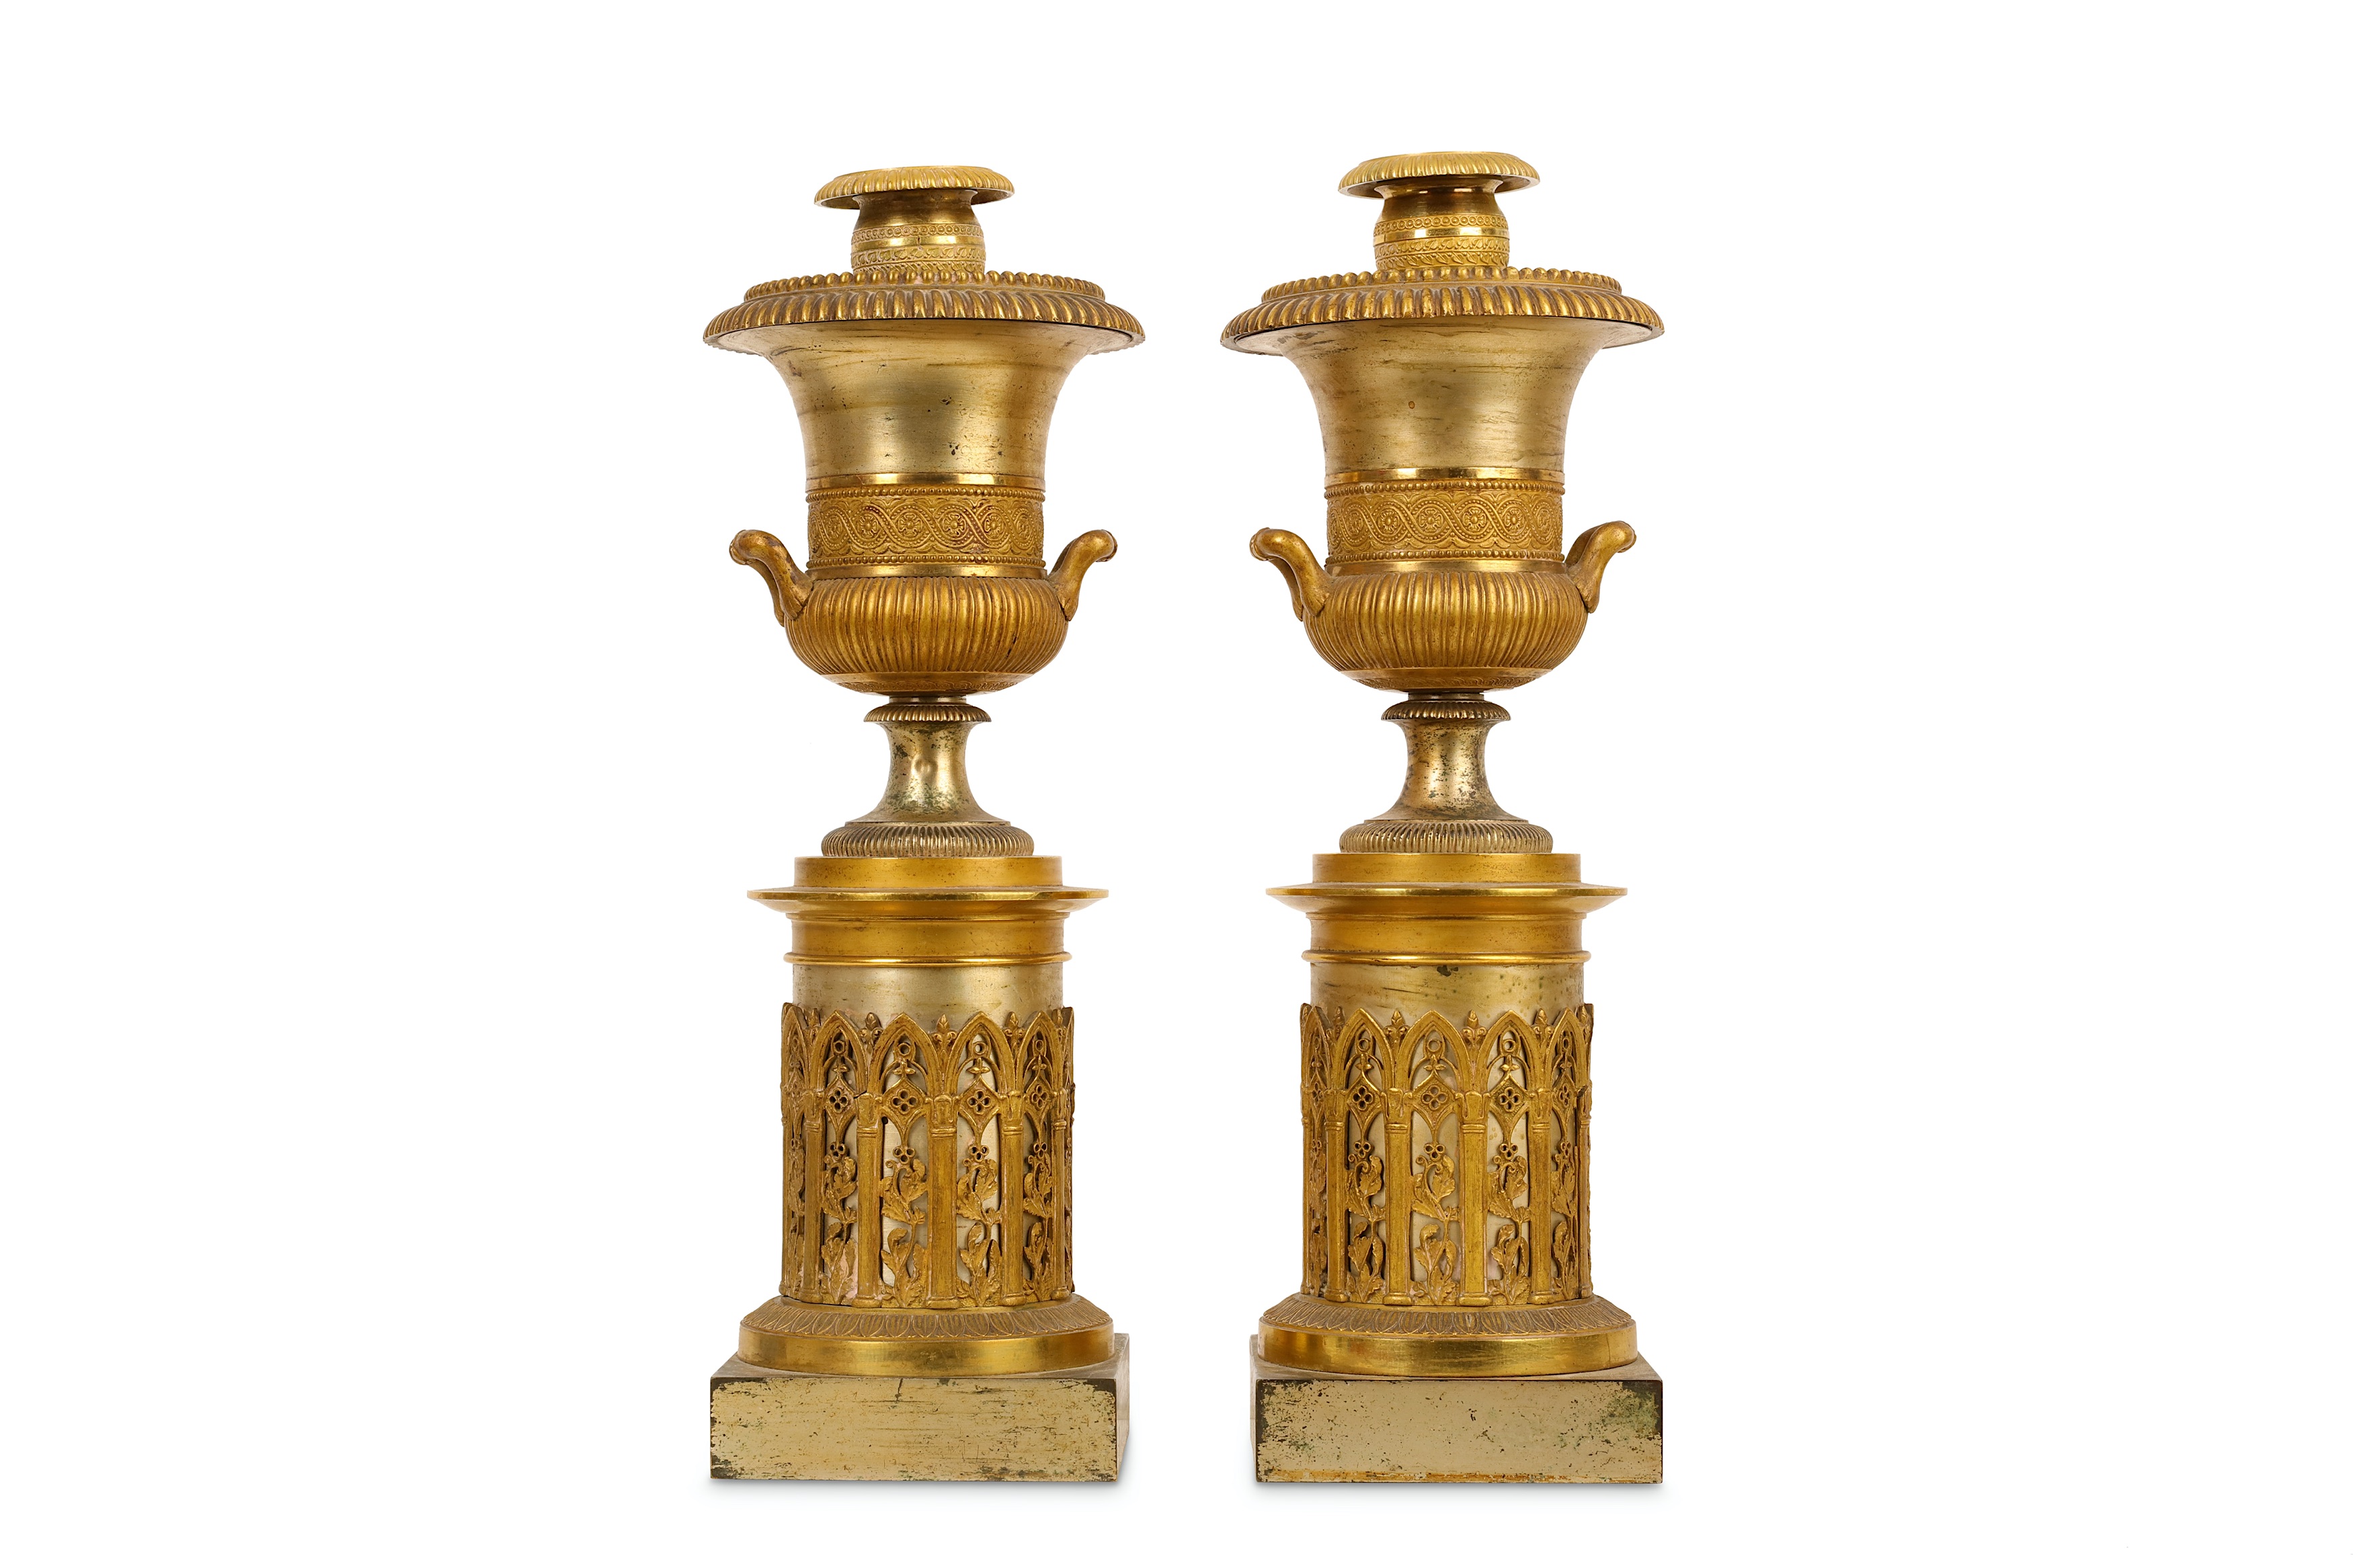 A PAIR OF SECOND QUARTER 19TH CENTURY FRENCH GILT AND SILVERED BRONZE CANDLESTICKS FORMED AS URNS - Image 3 of 5